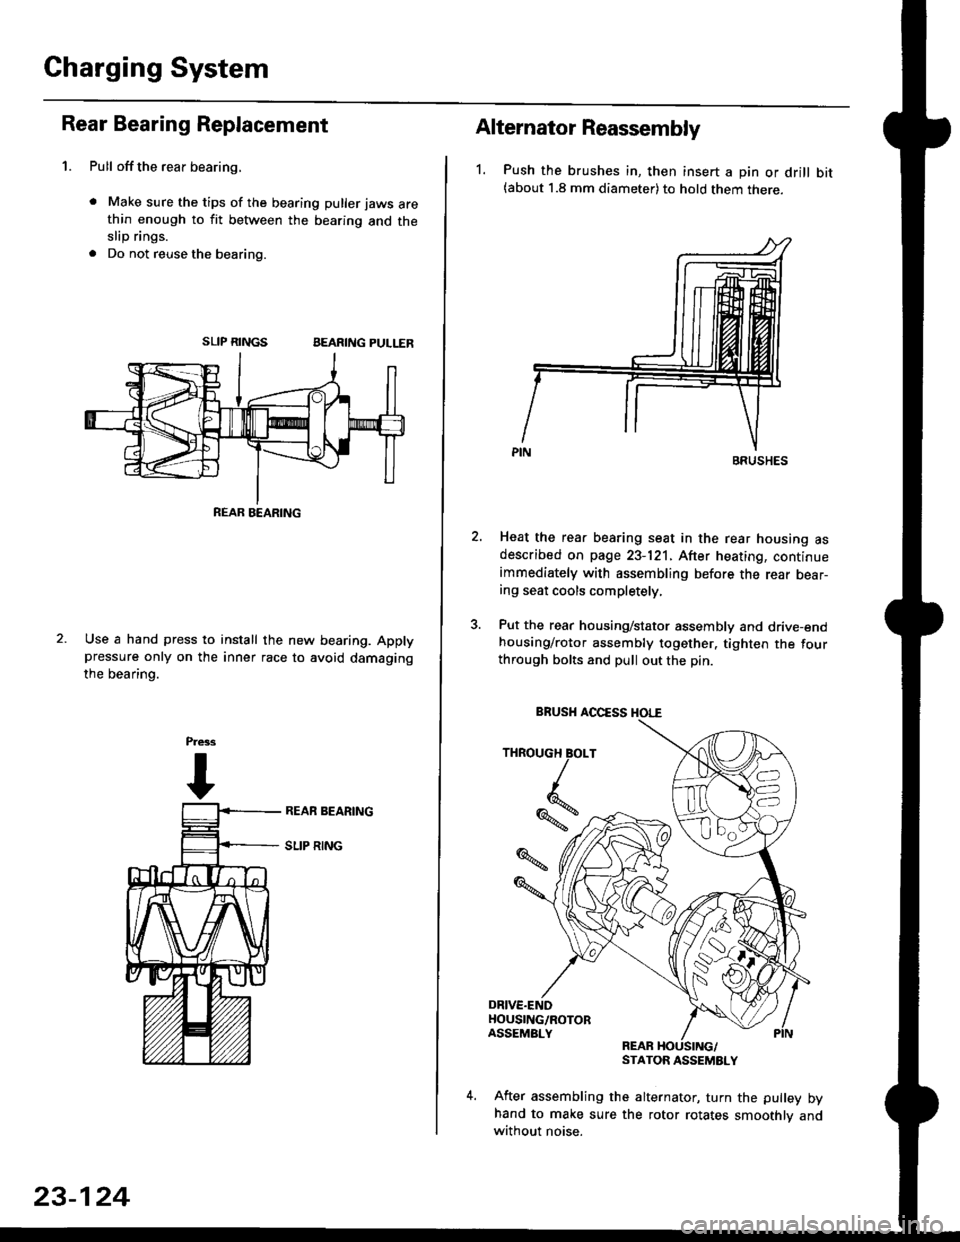 HONDA CIVIC 1998 6.G Workshop Manual Gharging System
Rear Bearing Replacement
1. Pull offthe rear bearing,
. Make sure the tips of the bearing puller jaws arethin enough to fit between the bearing and theslip rings.
. Do not reuse the be